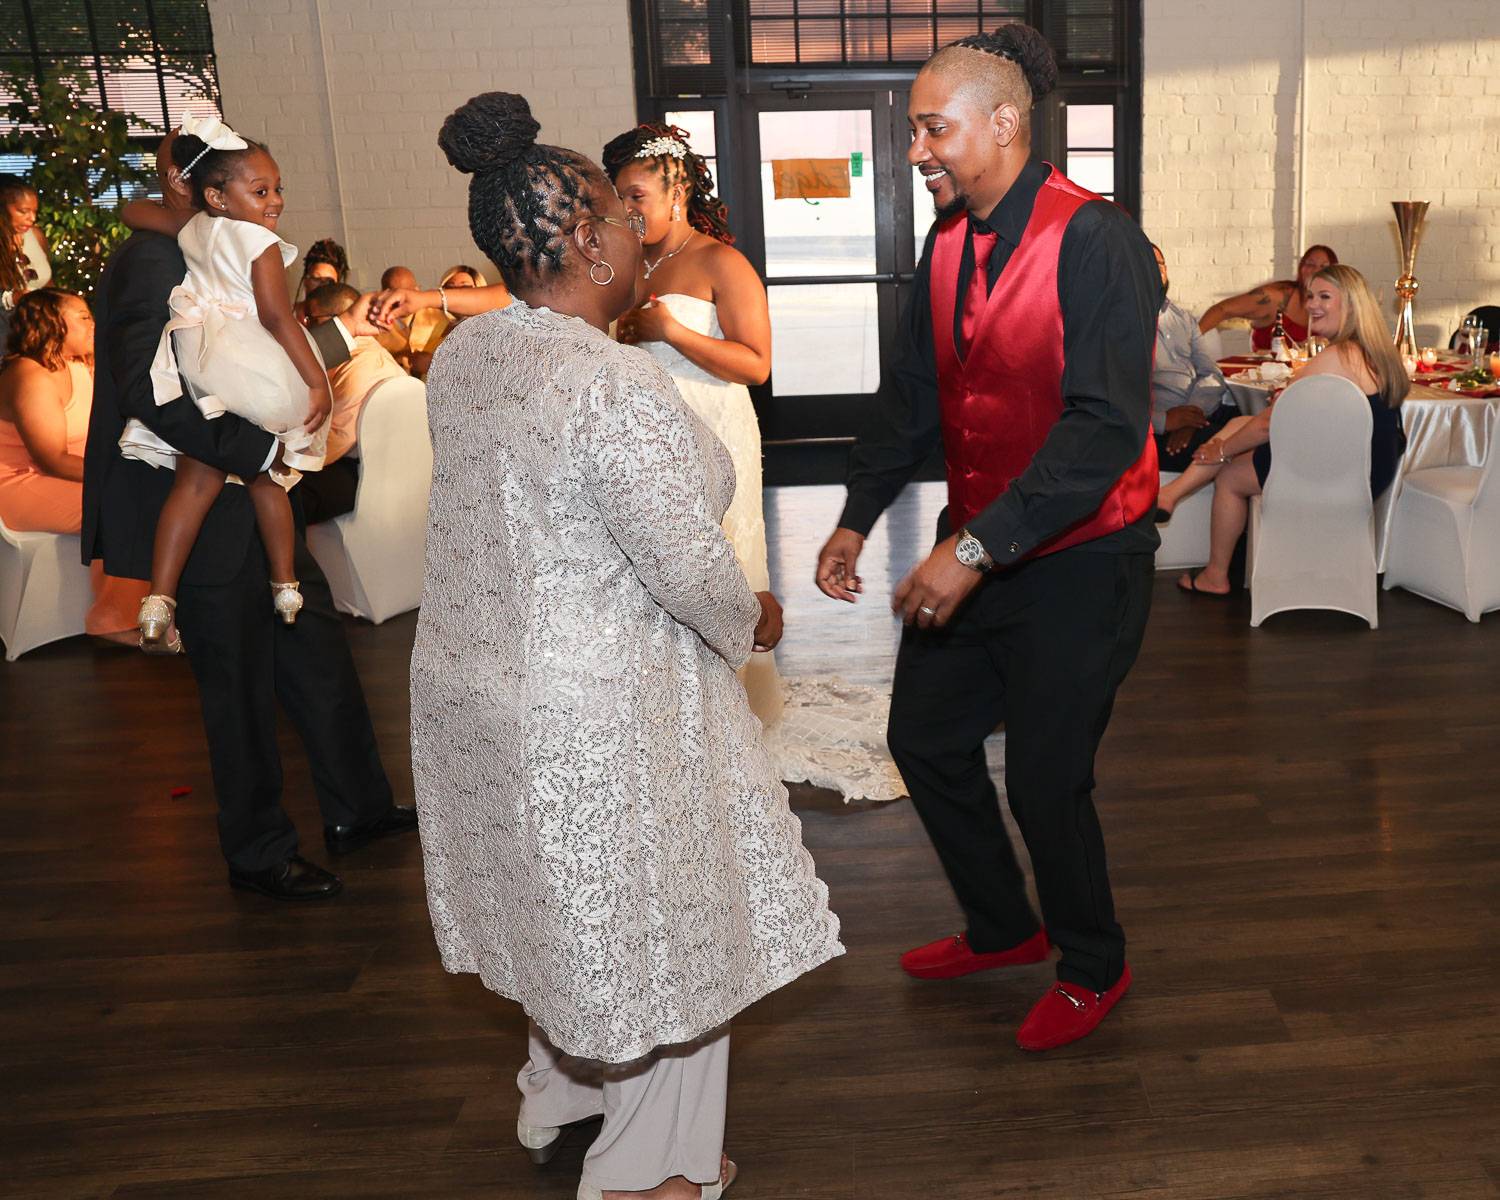 The groom dancing with his mom